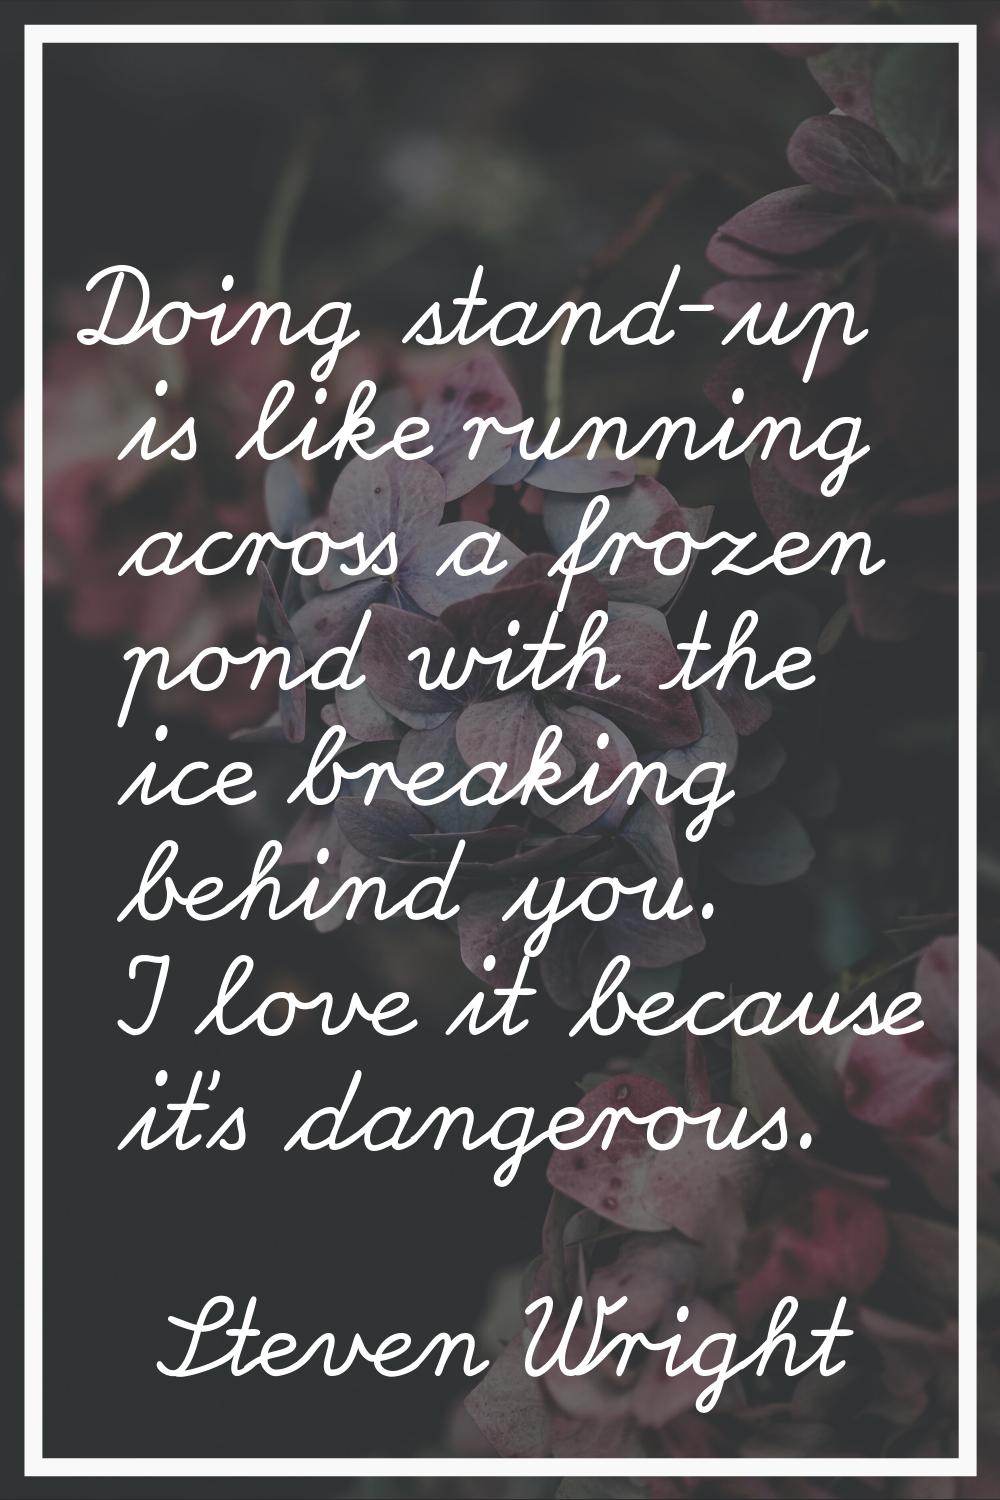 Doing stand-up is like running across a frozen pond with the ice breaking behind you. I love it bec